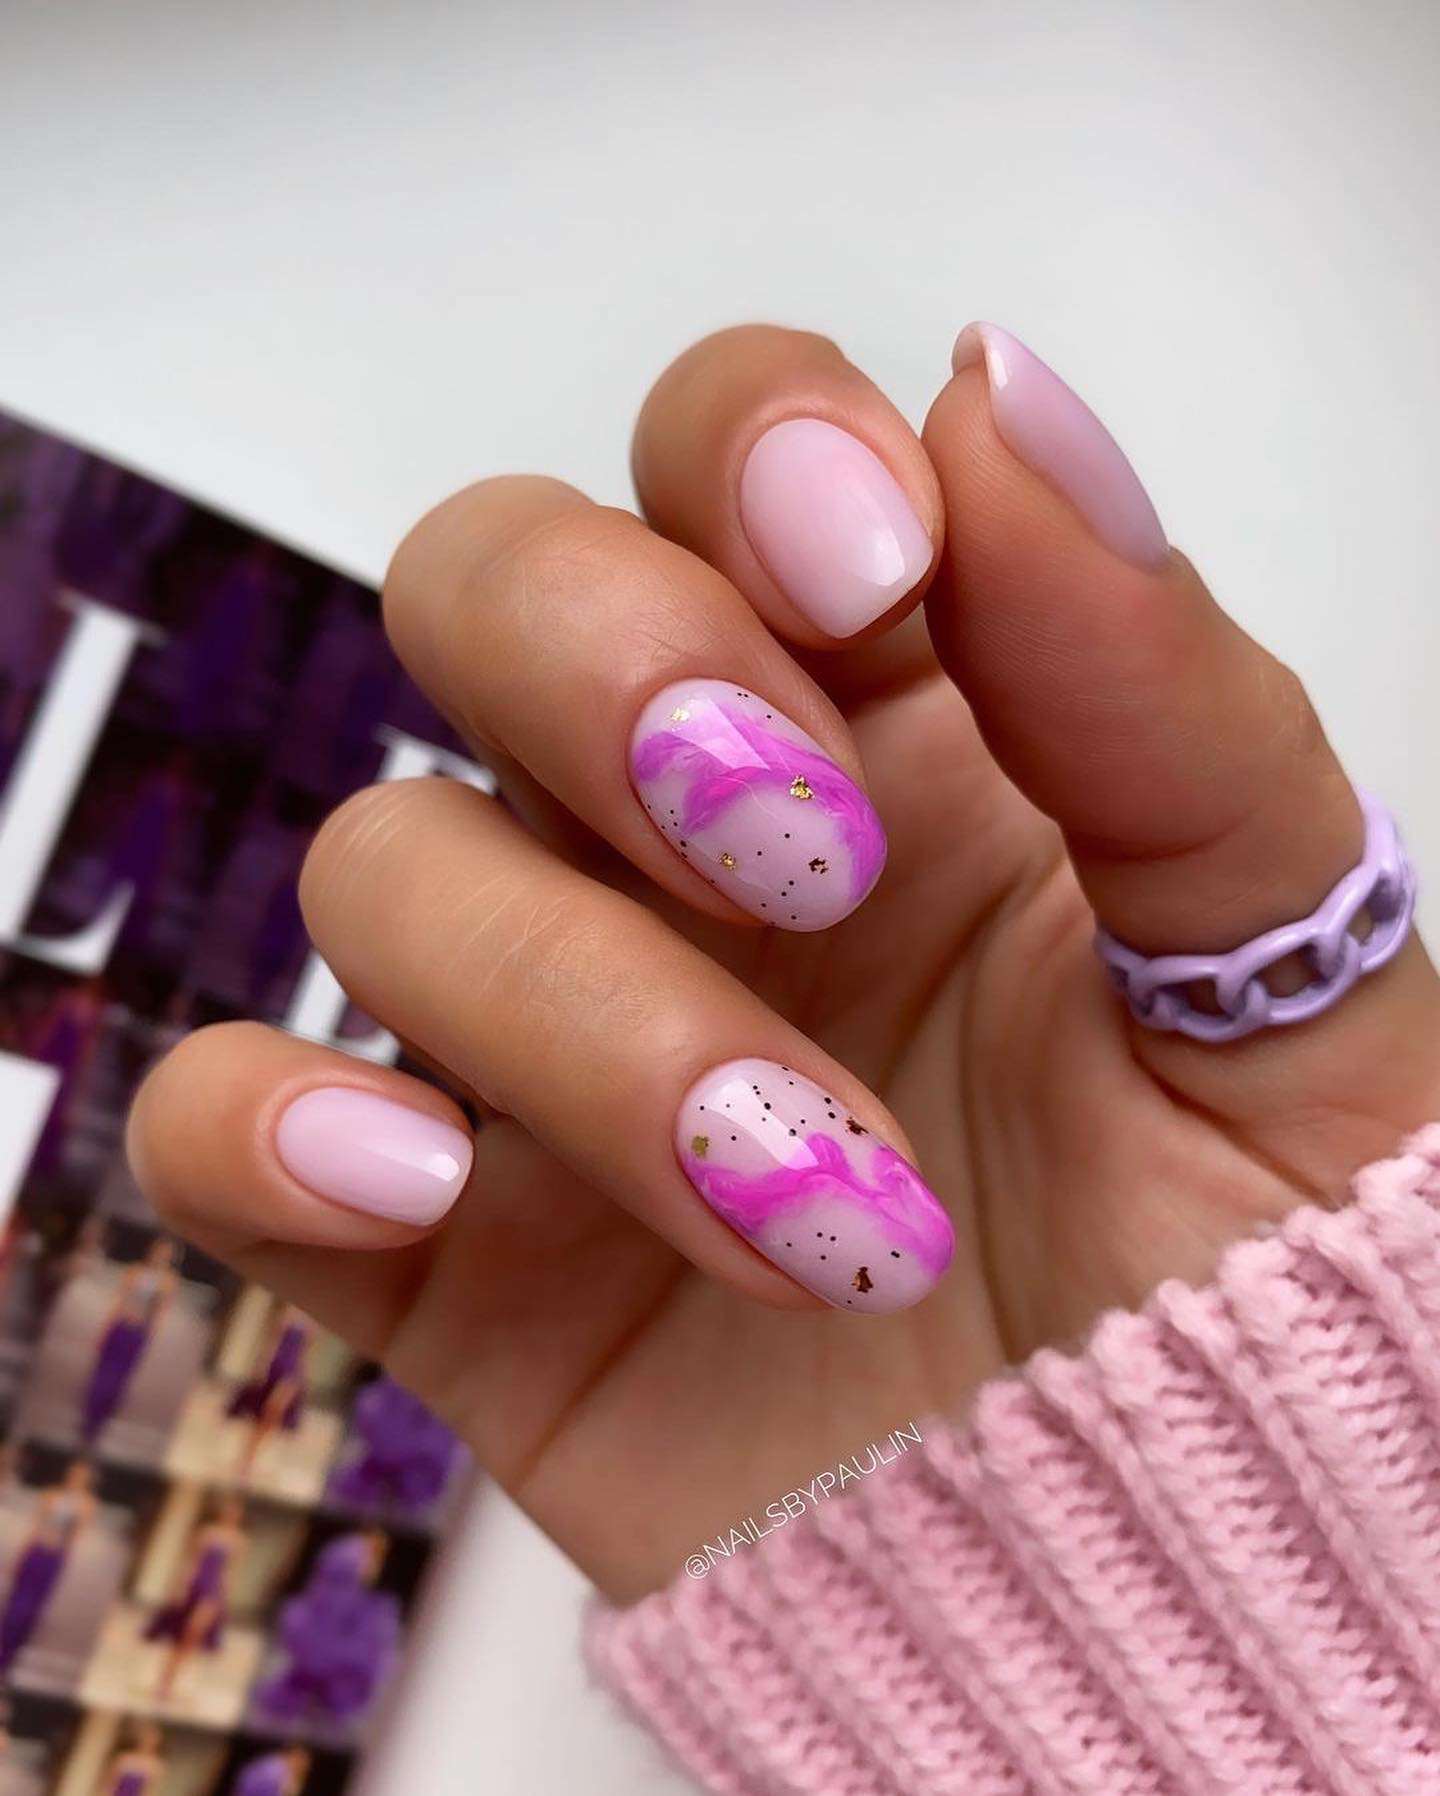 35 Nail Designs For 2022 You’ll Want To Try Immediately images 26